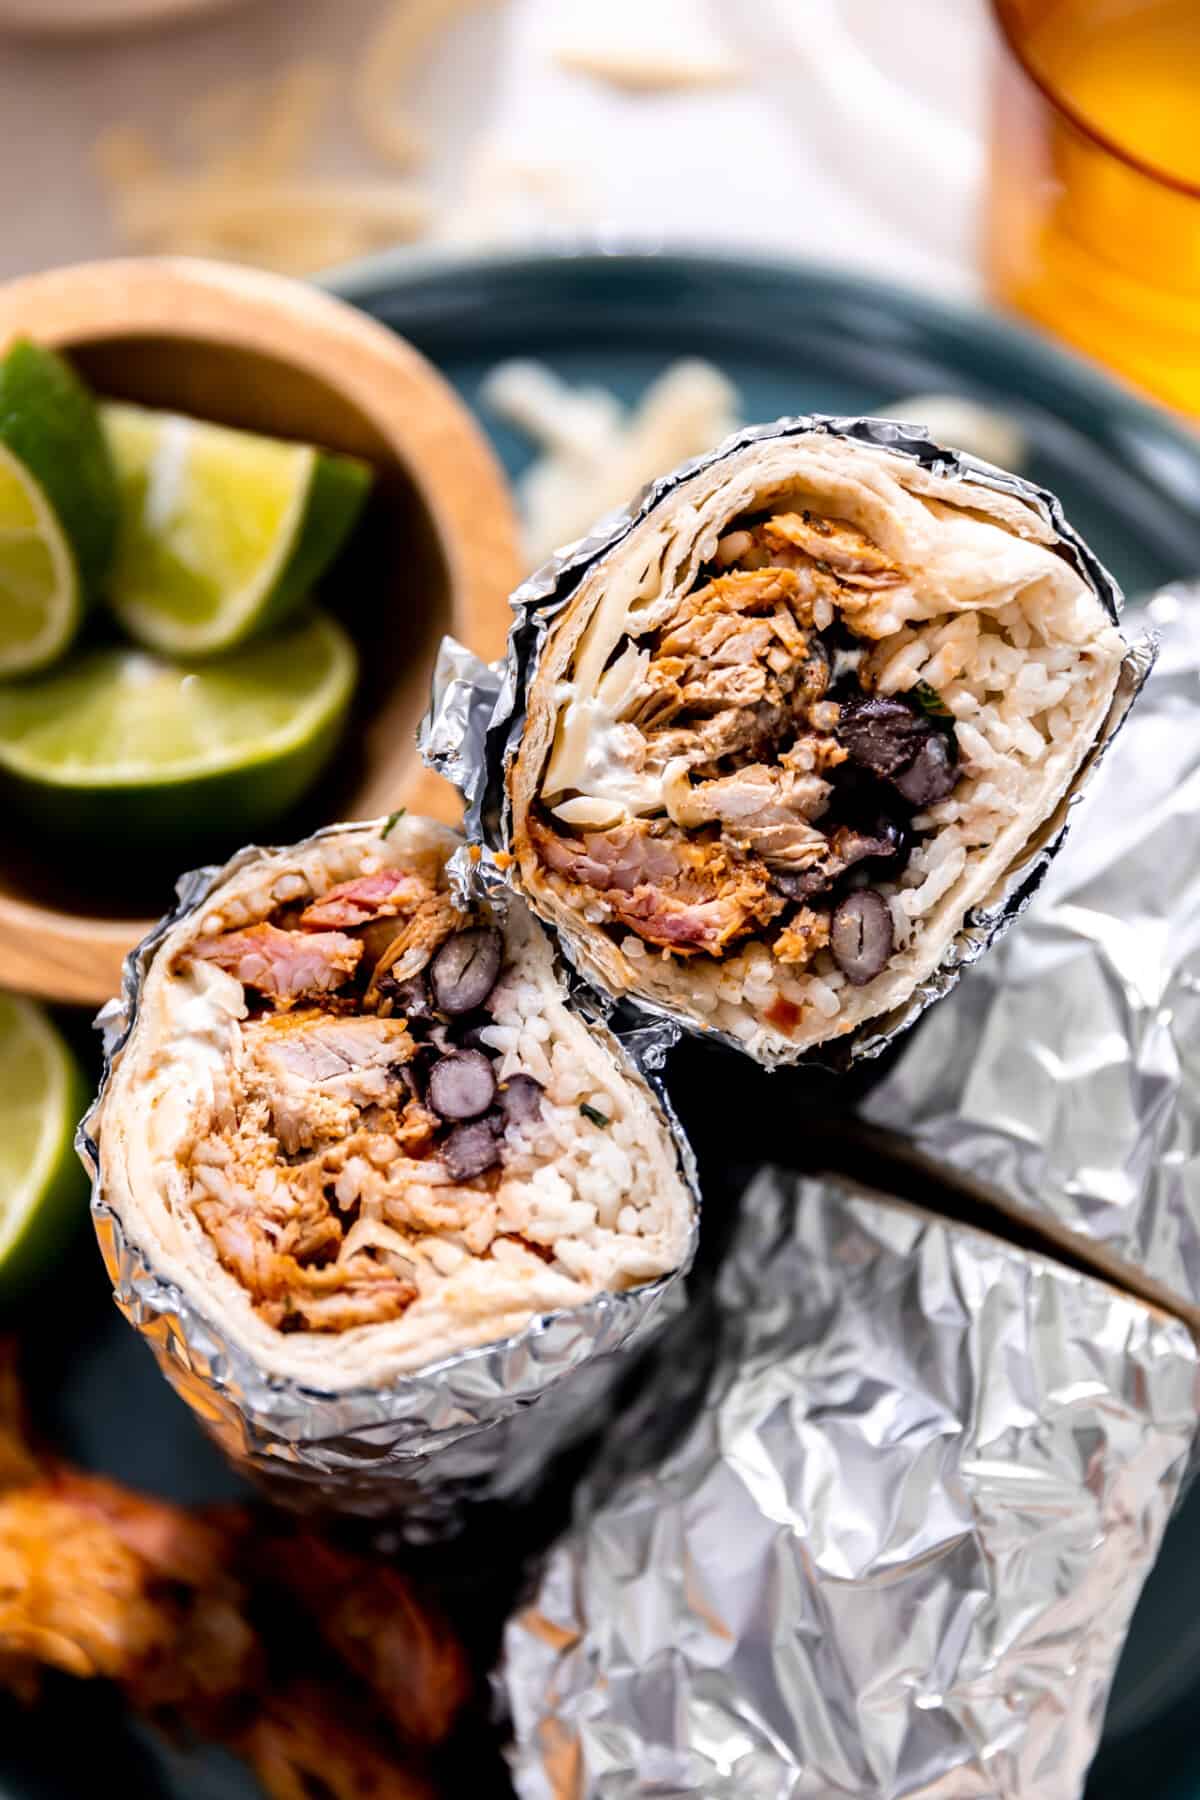 Burritos with carnitas, white rice and beans wrapped in foil and sliced in half.